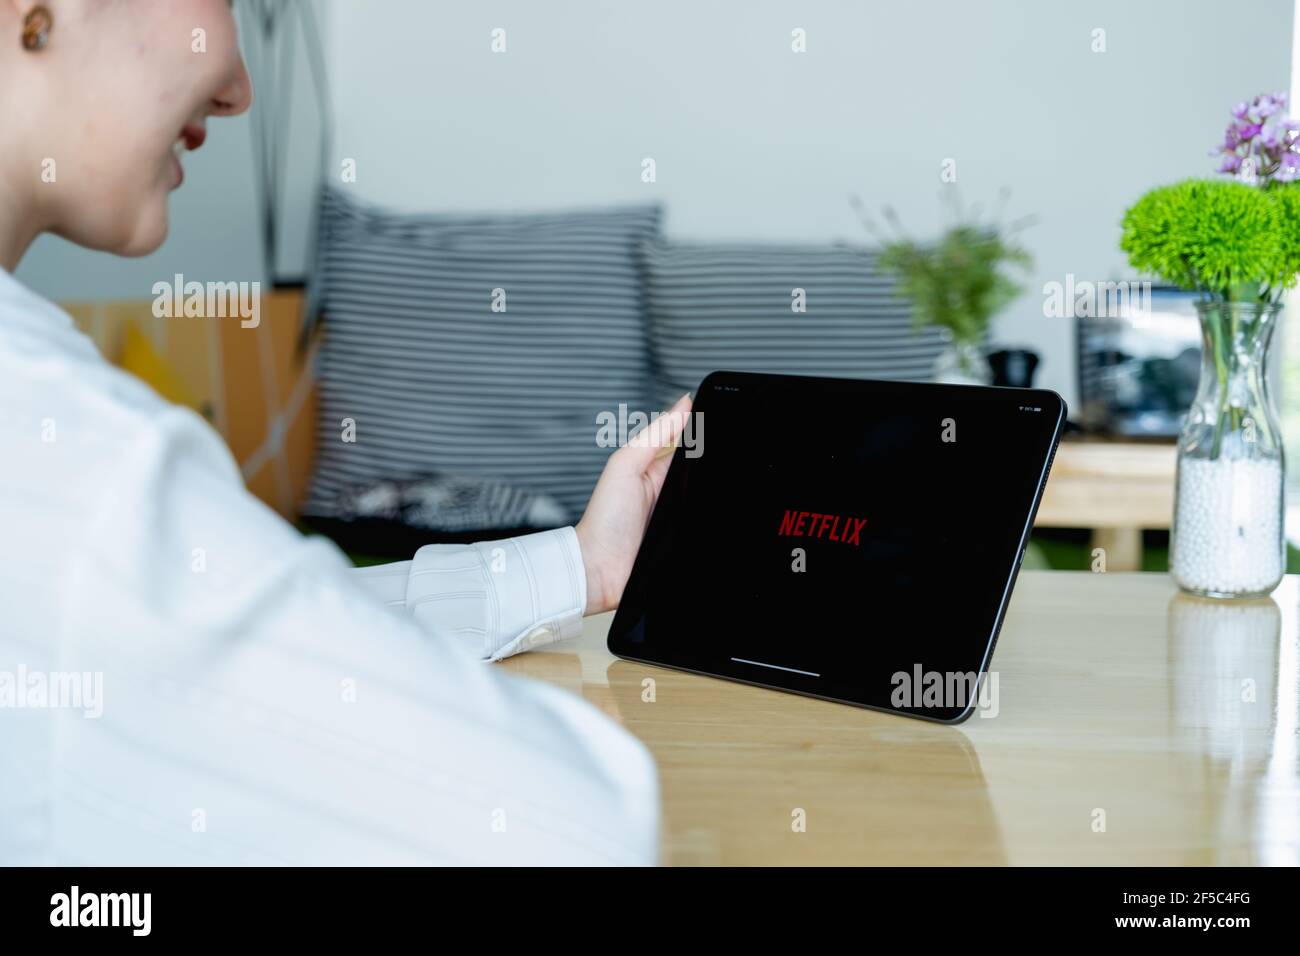 CHIANG MAI, THAILAND : SEP 07, 2020 : Netflix app on ipad screen. Netflix is an international leading subscription service for watching TV episodes Stock Photo